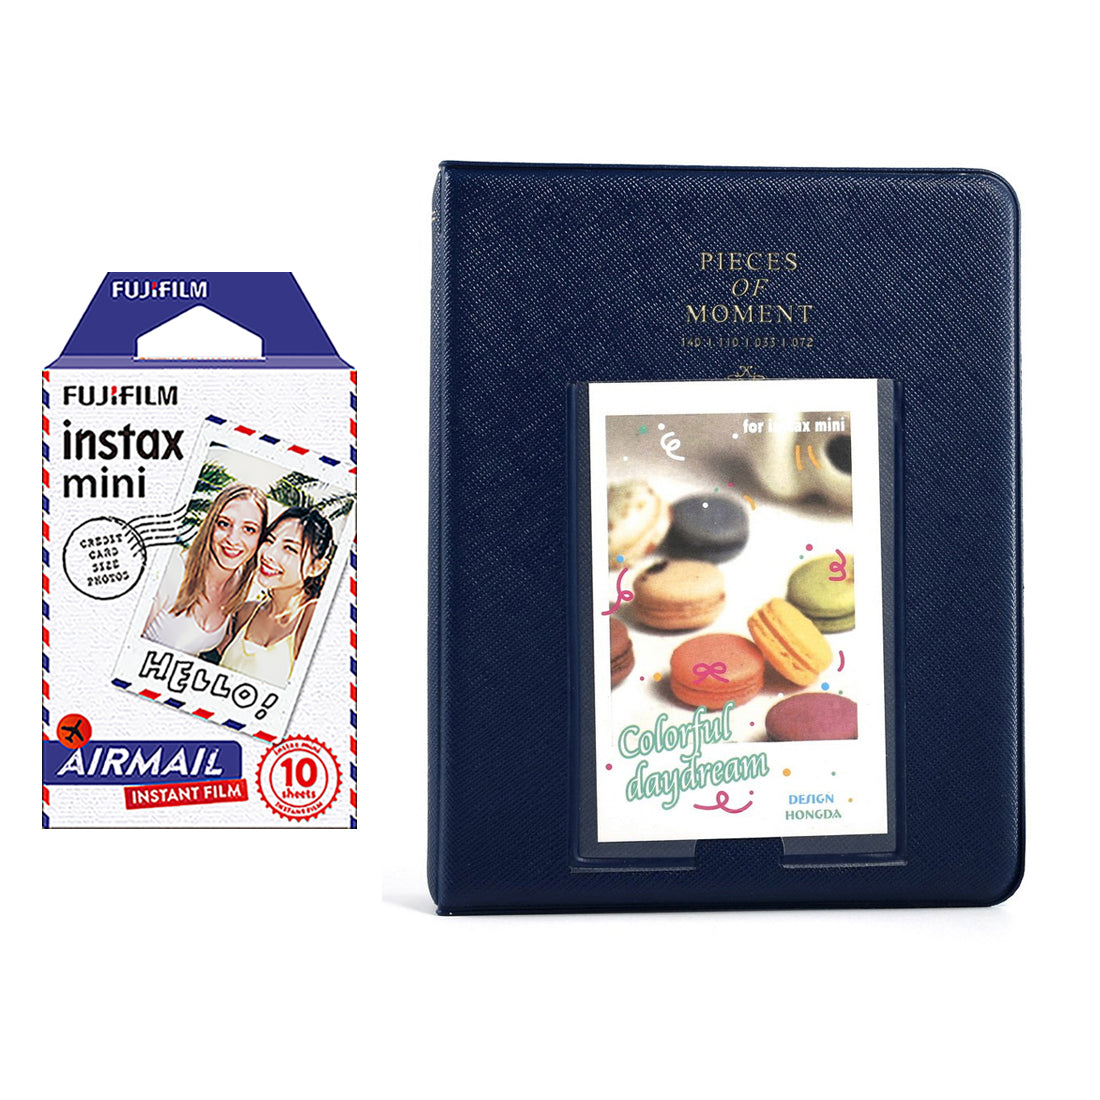 Fujifilm Instax Mini 10X1 airmail Instant Film with Instax Time Photo Album 64 Sheets Navy blue